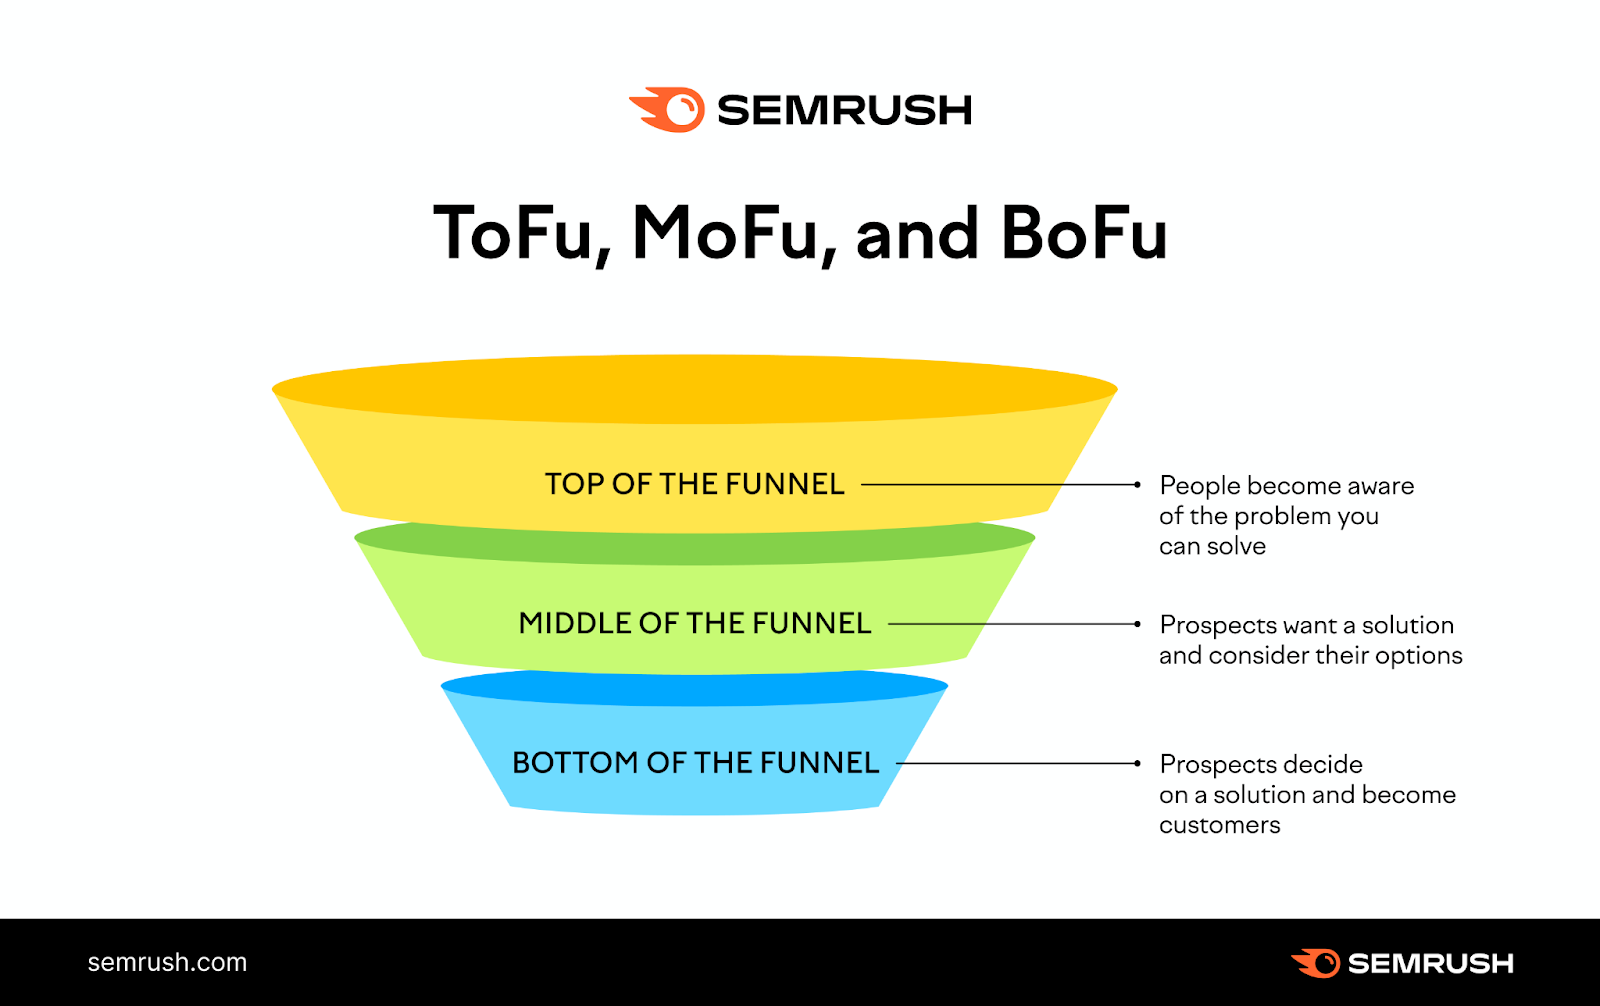 Marketing funnel with "Top of the Funnel (ToFu)," "Middle of the Funnel (MoFu)," and "Bottom of the Funnel (BoFu)" stages